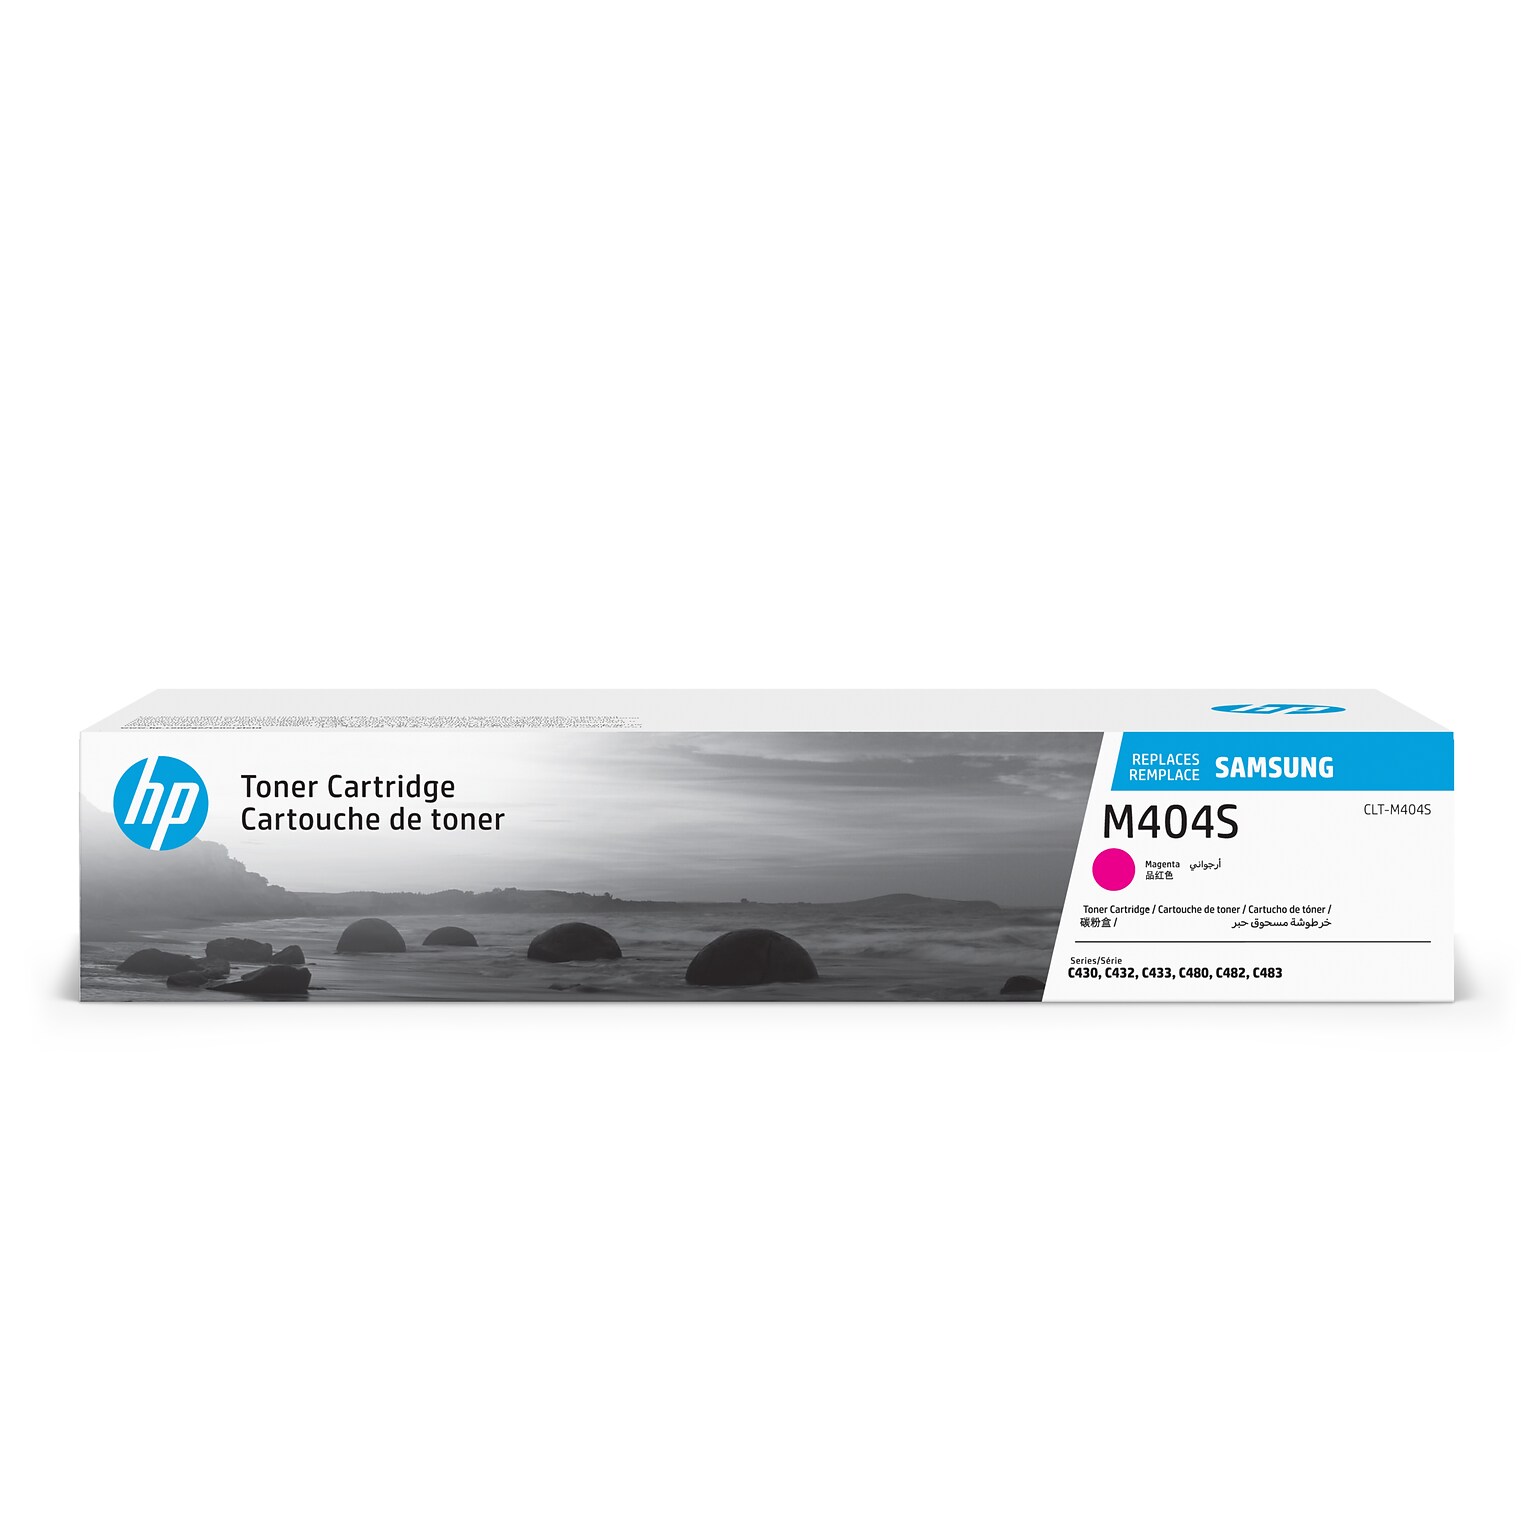 HP M404S Magenta Toner Cartridge for Samsung CLT-M404S (SU234), Samsung-branded printer supplies are now HP-branded